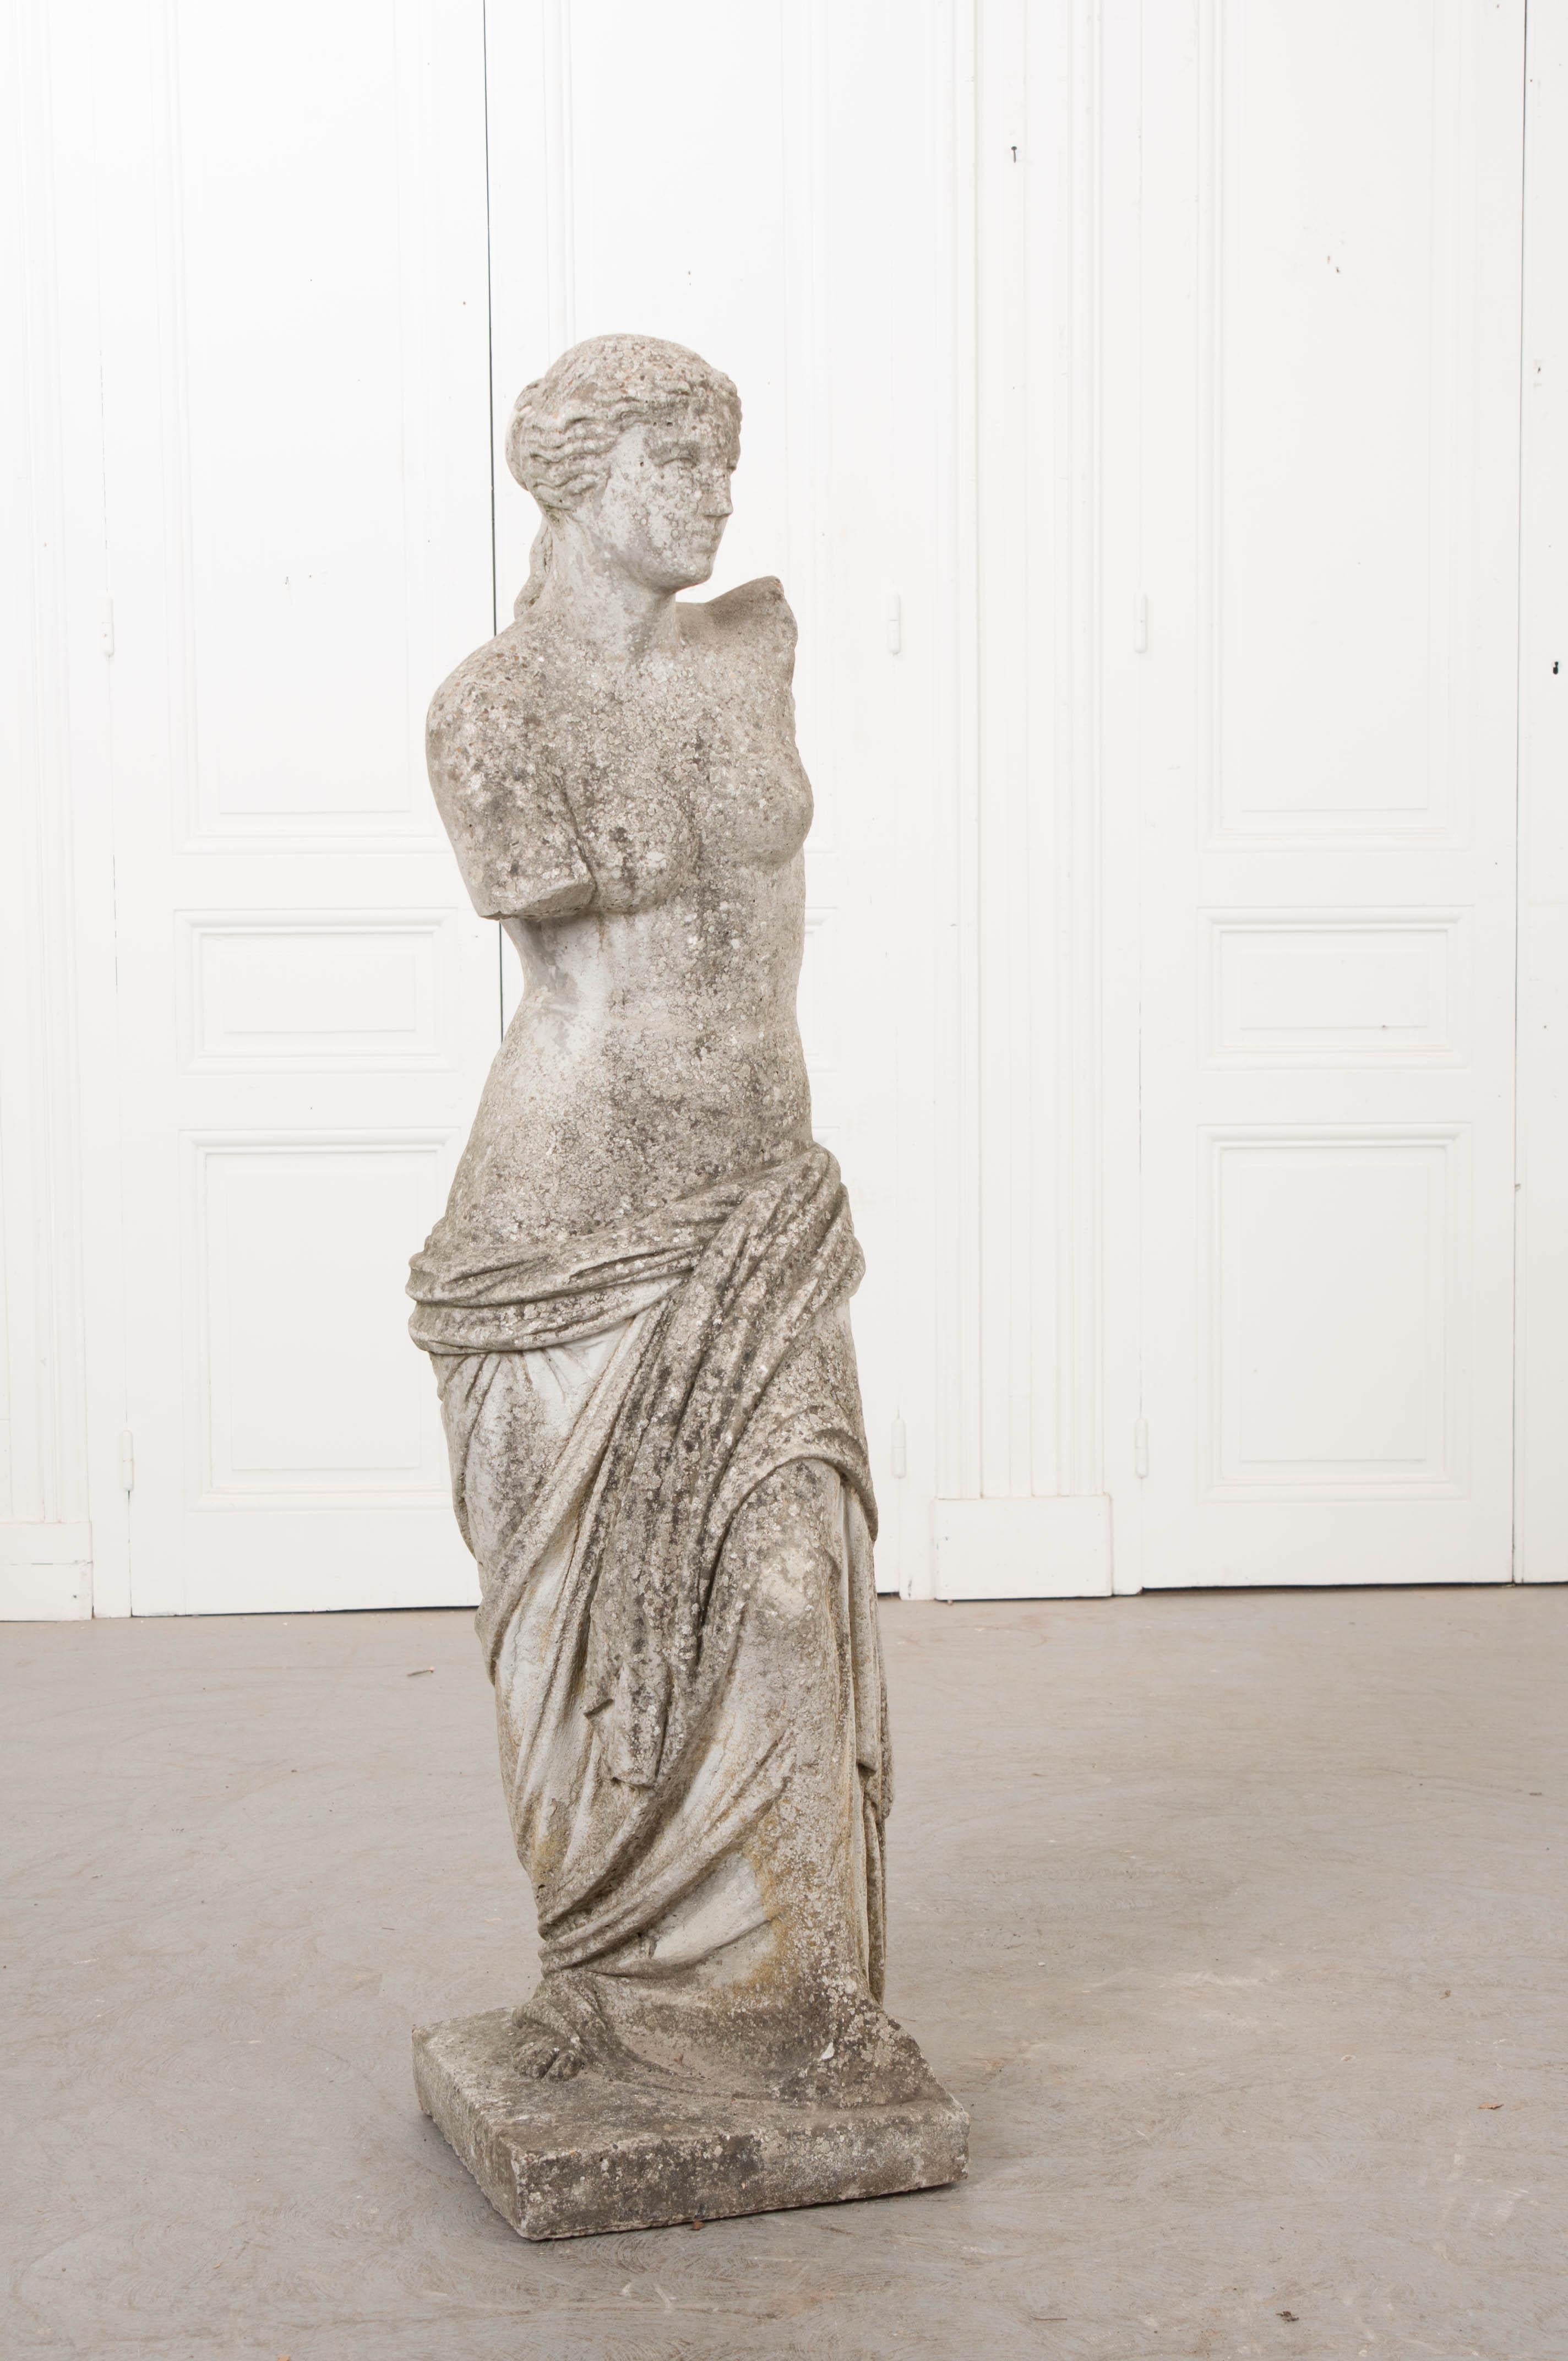 This carved stone statue of Venus de Milo, circa 1920, was found in England and modeled after the original which was thought to be Aphrodite, the Greek goddess of love and beauty. She will certainly add a classical touch to any garden and would be